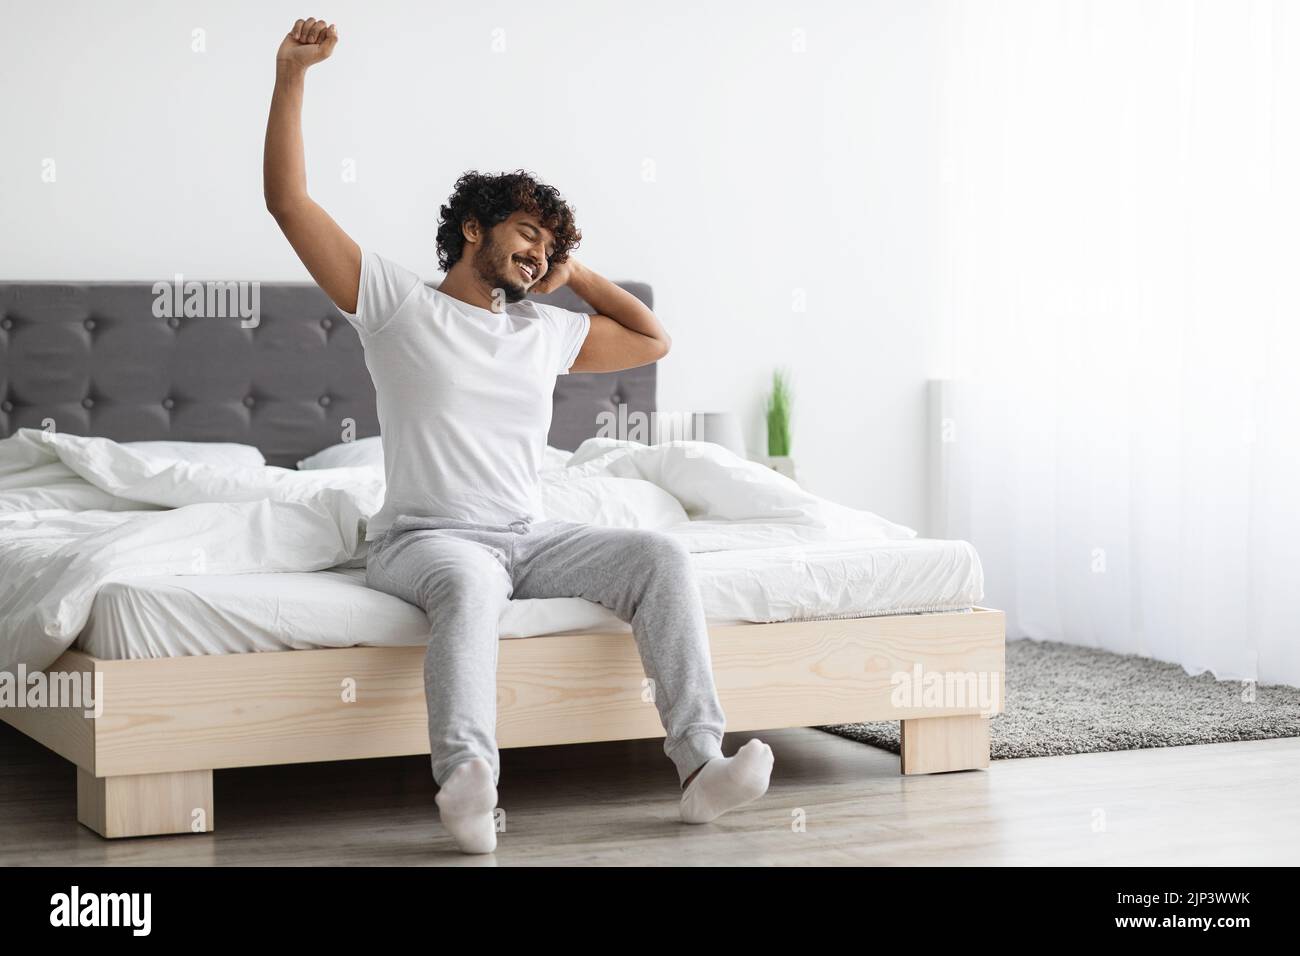 Cool eastern millennial guy stretching in bed Stock Photo